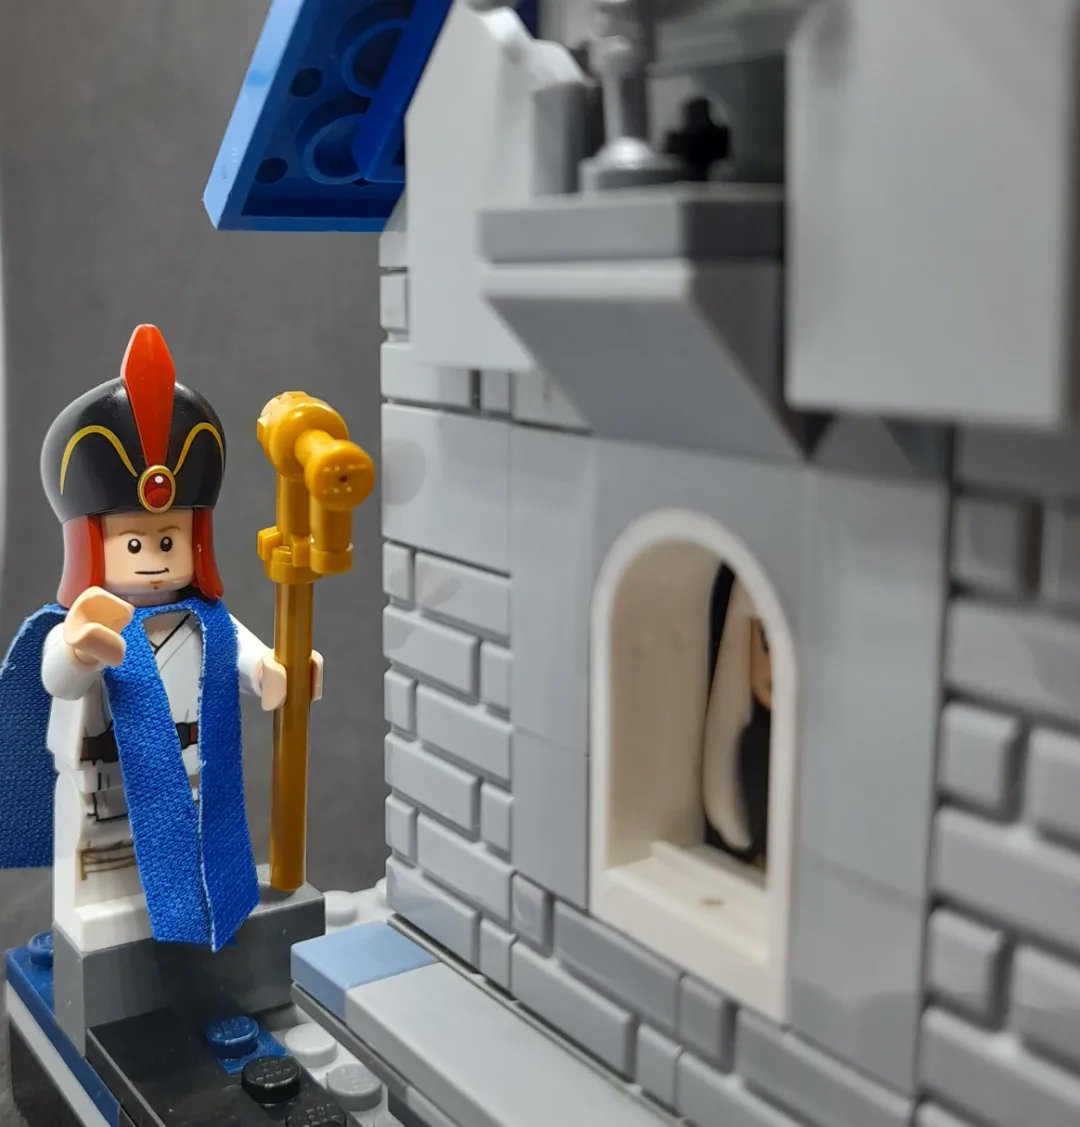 Today 13 May was the #Feast of #Julian of #Norwich here is an #anchoress being #blessed by a #bishop reinterpreted in @LEGO_Group after original @CorpusCambridge #julianofnorwich #bookart #medievalart #devotion #LEGO #arthistory #femalesaint #saint #illuminatedmanuscript #window